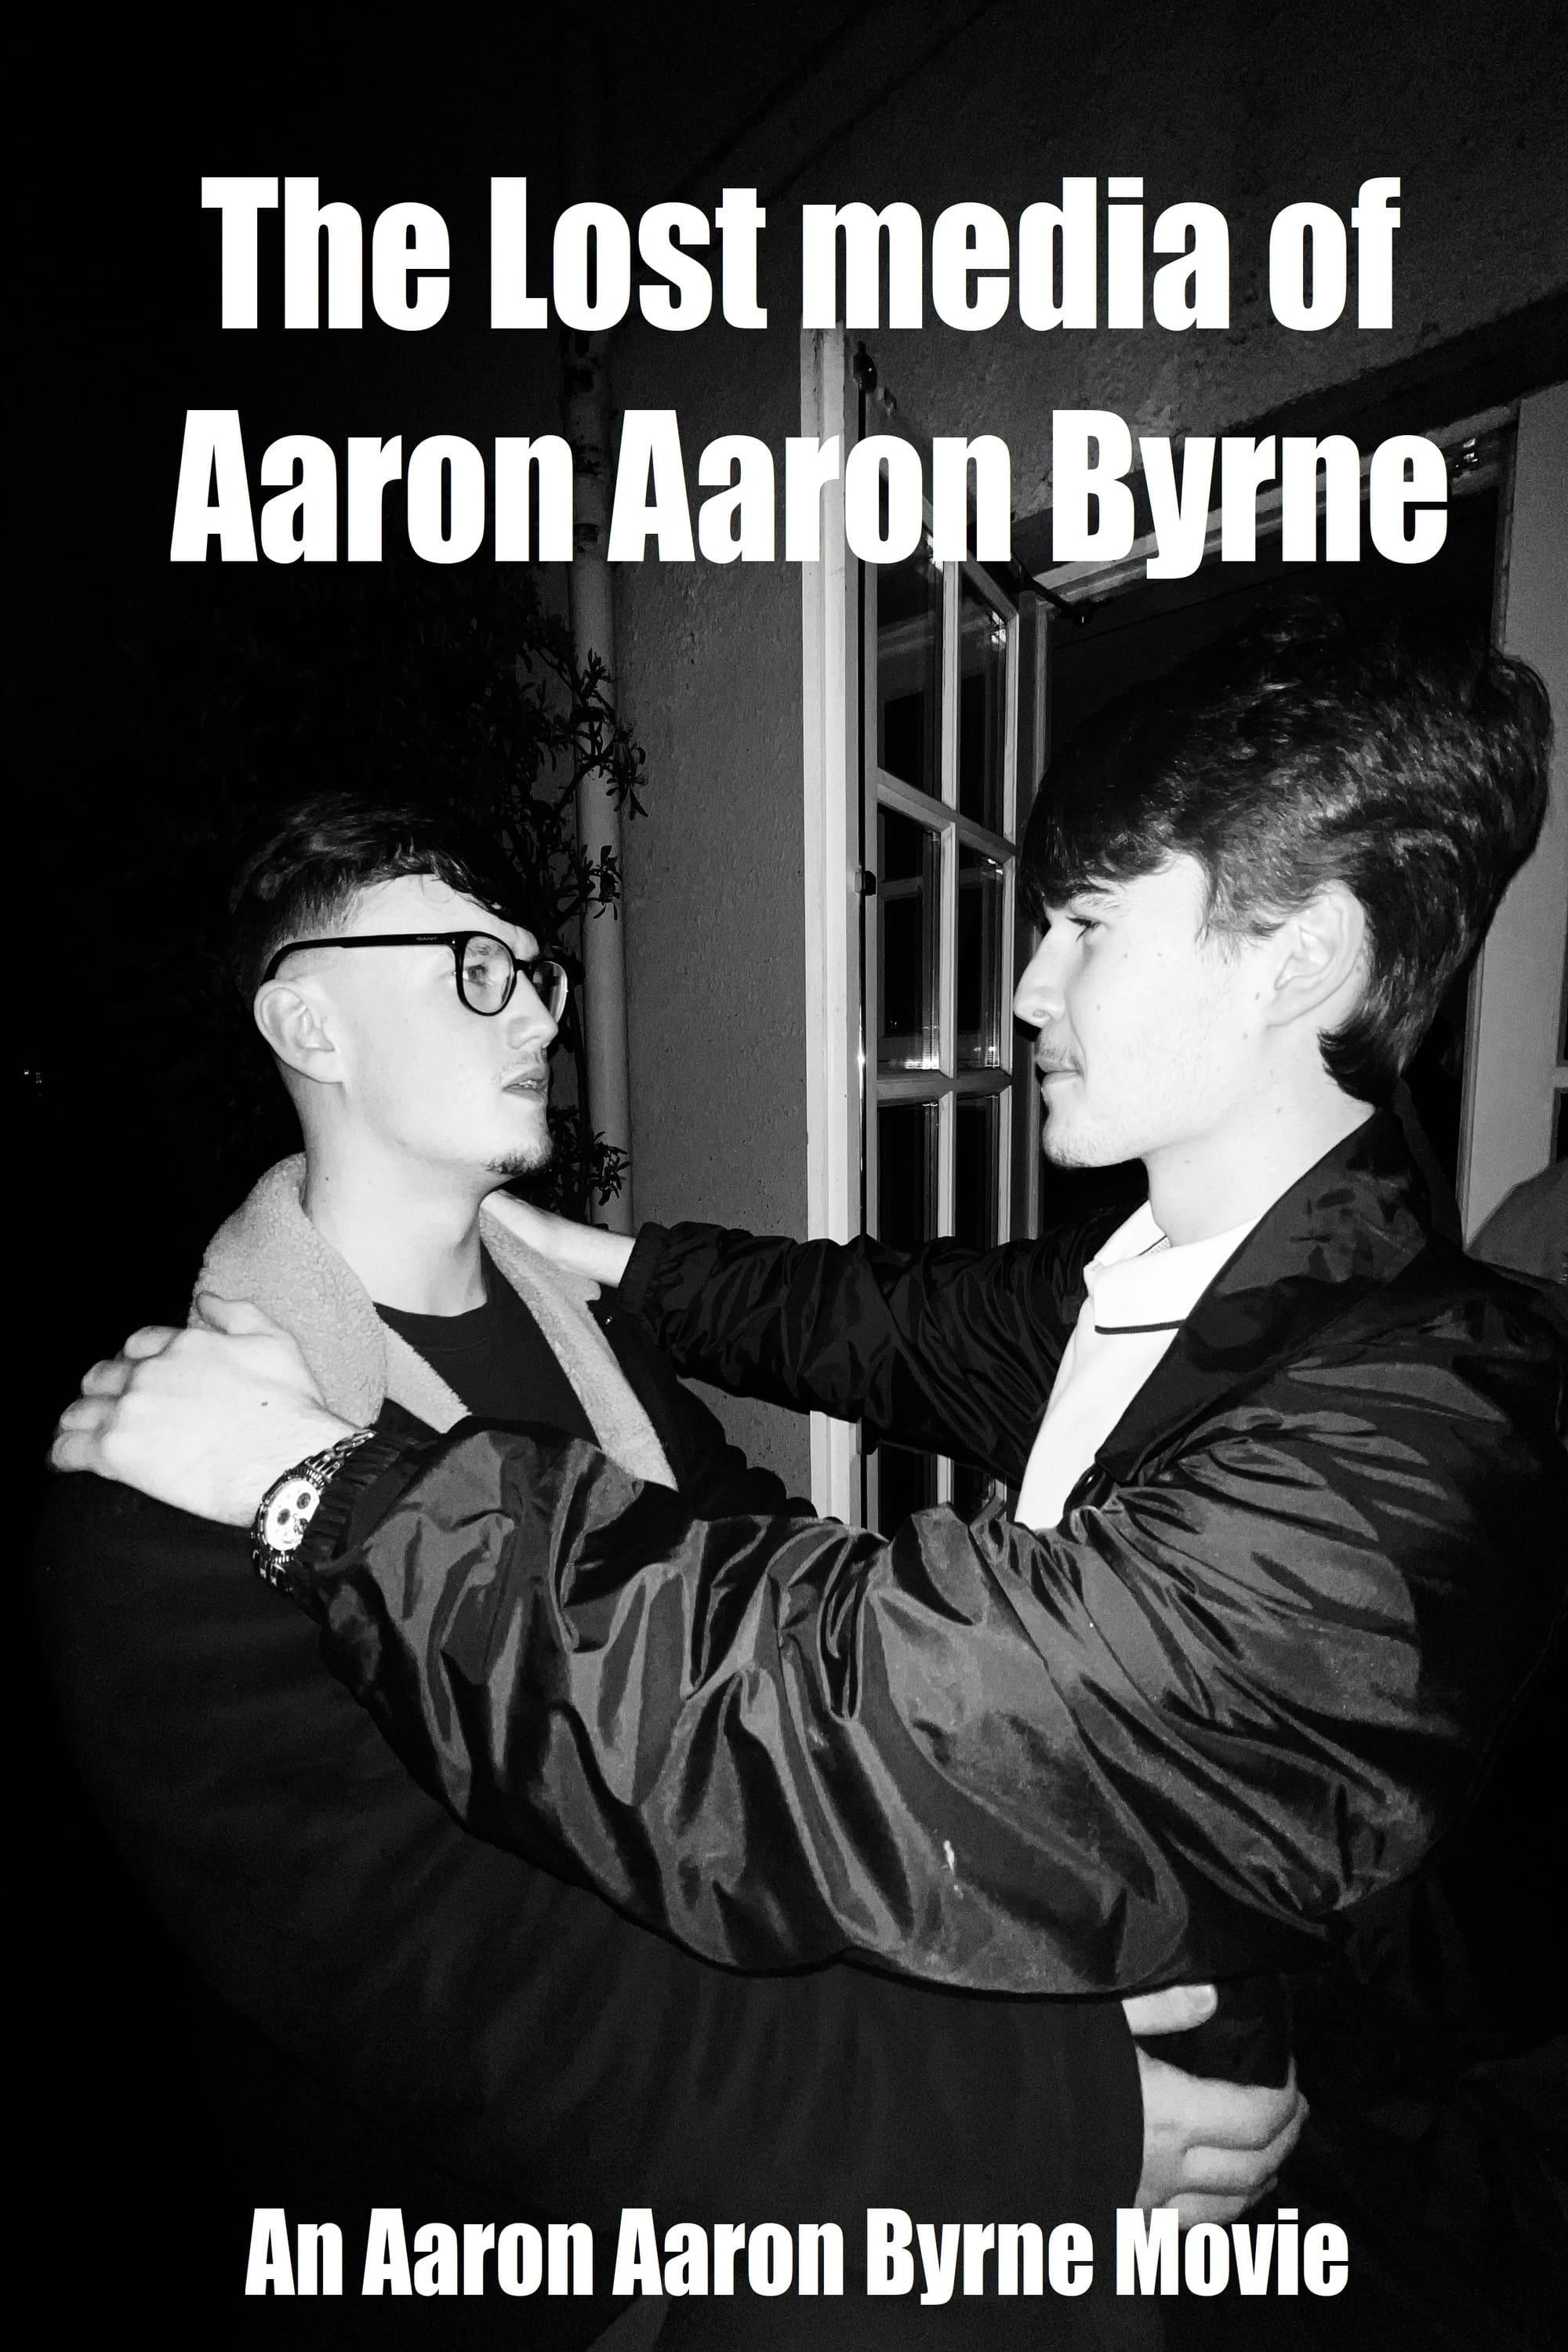 The Lost Media of Aaron Aaron Byrne poster